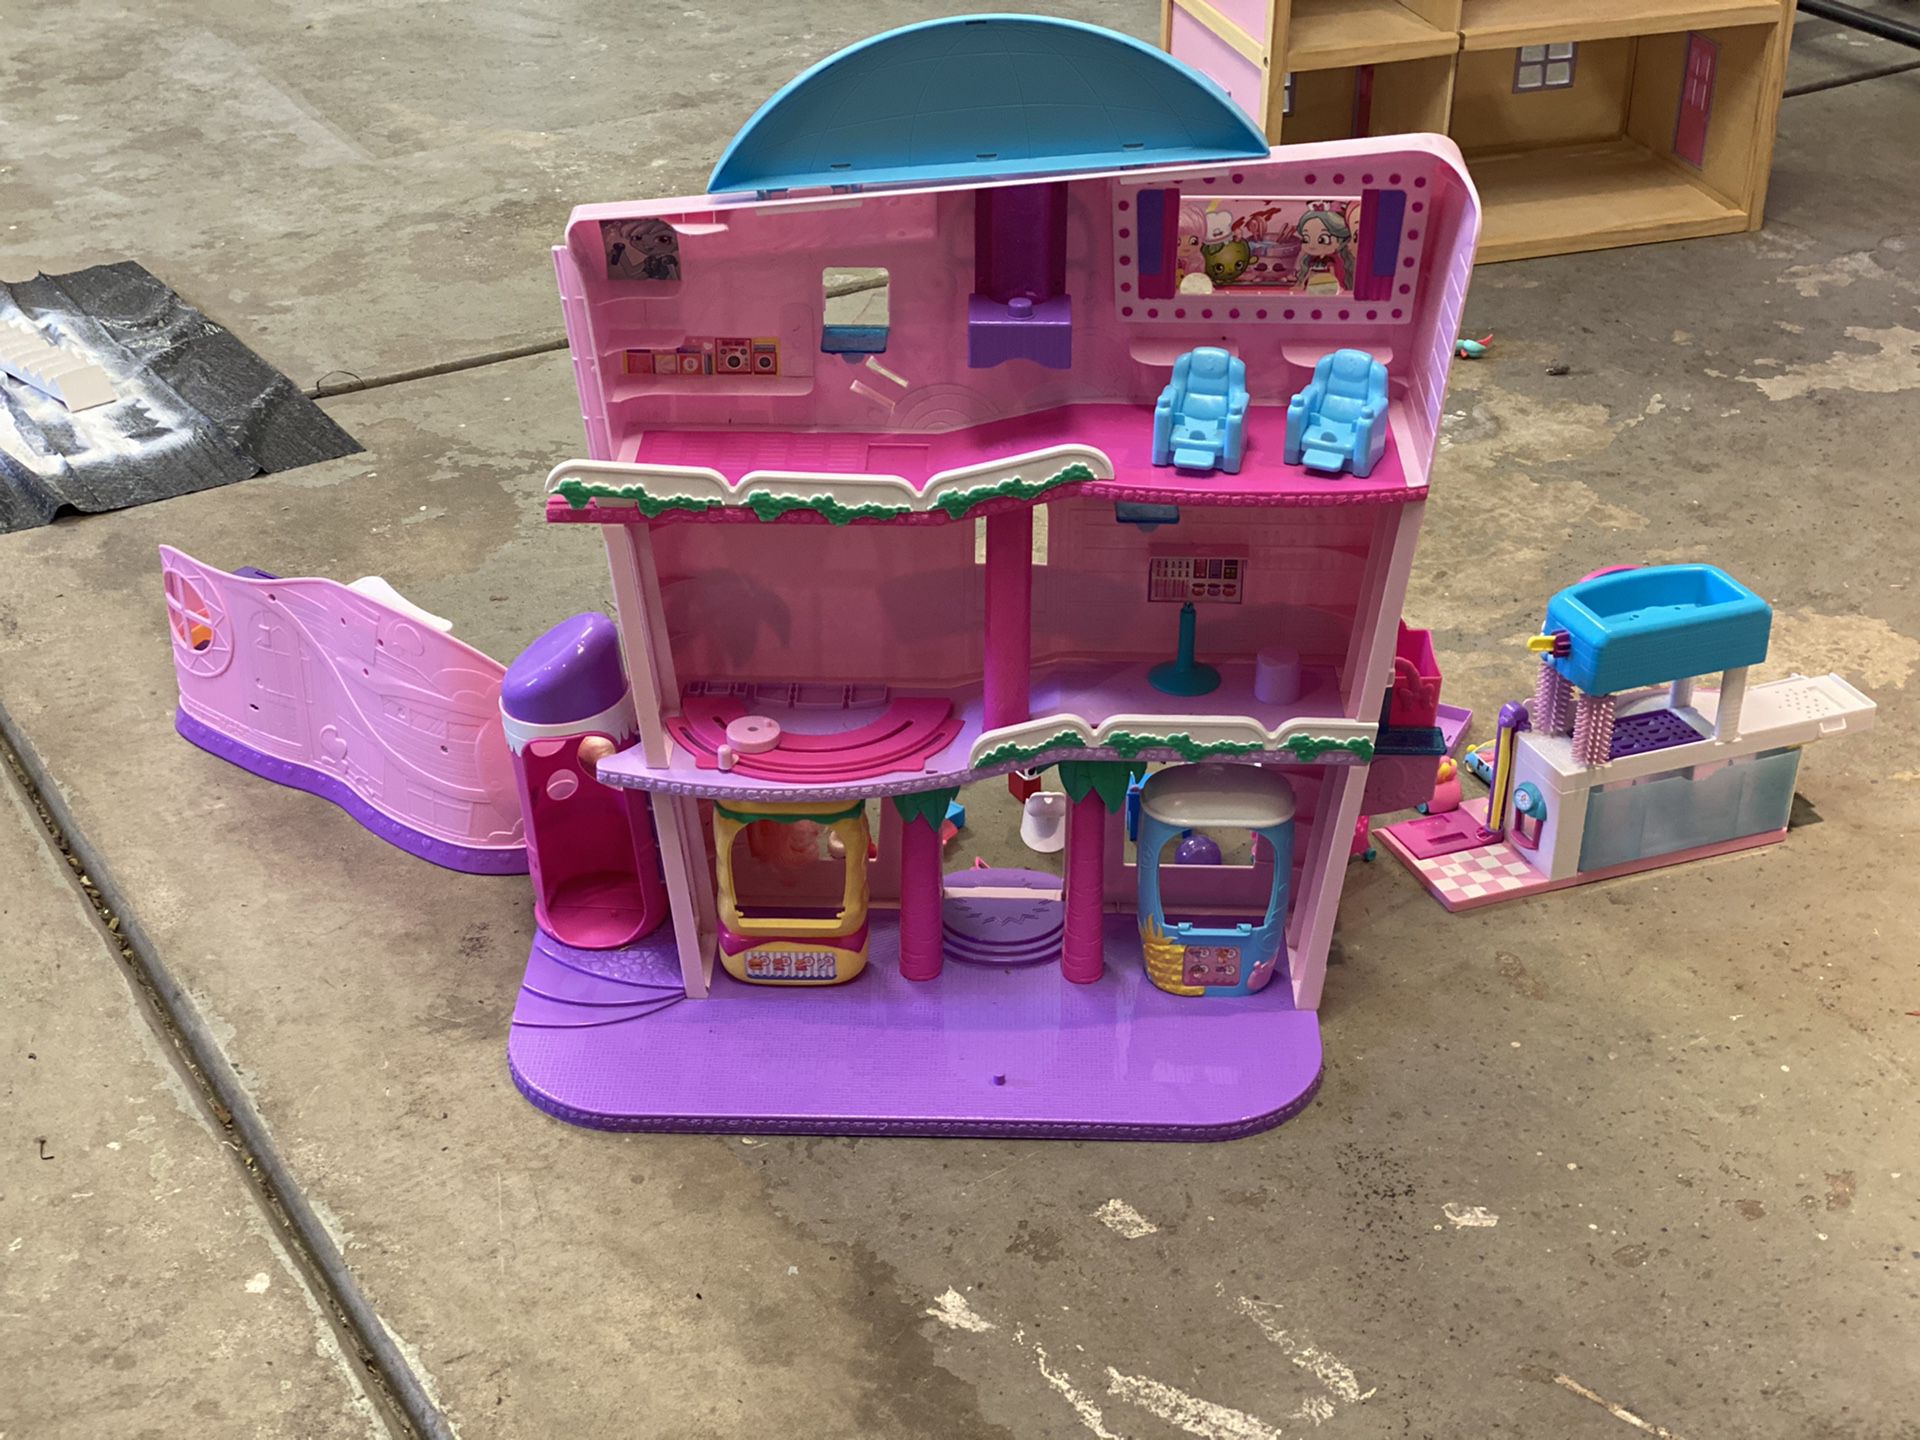 Shopkins house, car wash and little house for Sale in Mundelein, IL